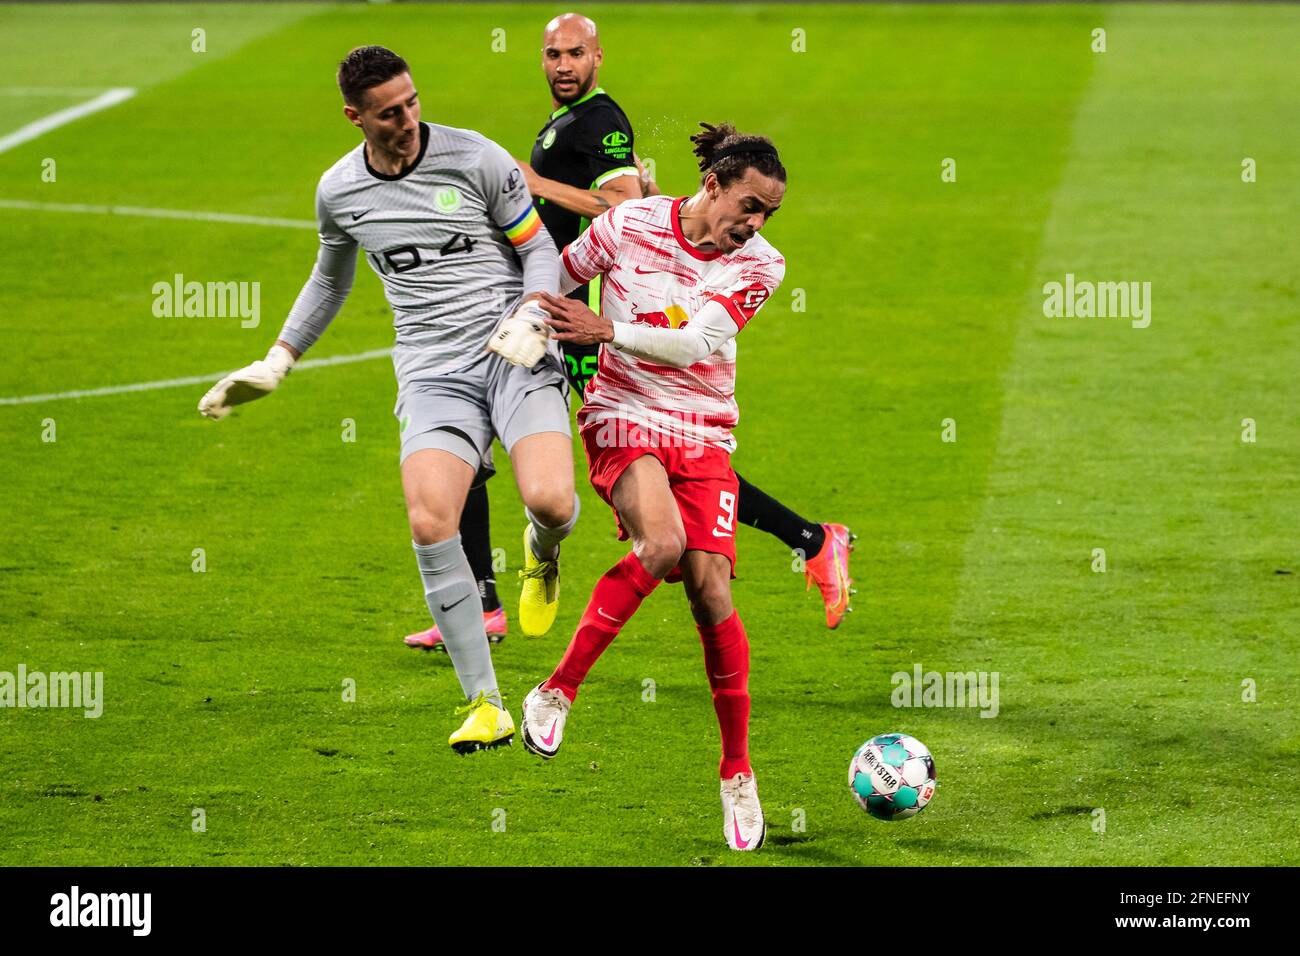 Leipzig, Germany. 16th May, 2021. Yussuf Poulsen (R) of Leipzig vies with goalkeeper Koen Casteels (L) of Wolfsburg during a German Bundesliga match between RB Leipzig and VfL Wolfsburg in Leipzig, Germany, May 16, 2021. Credit: Kevin Voigt/Xinhua/Alamy Live News Stock Photo